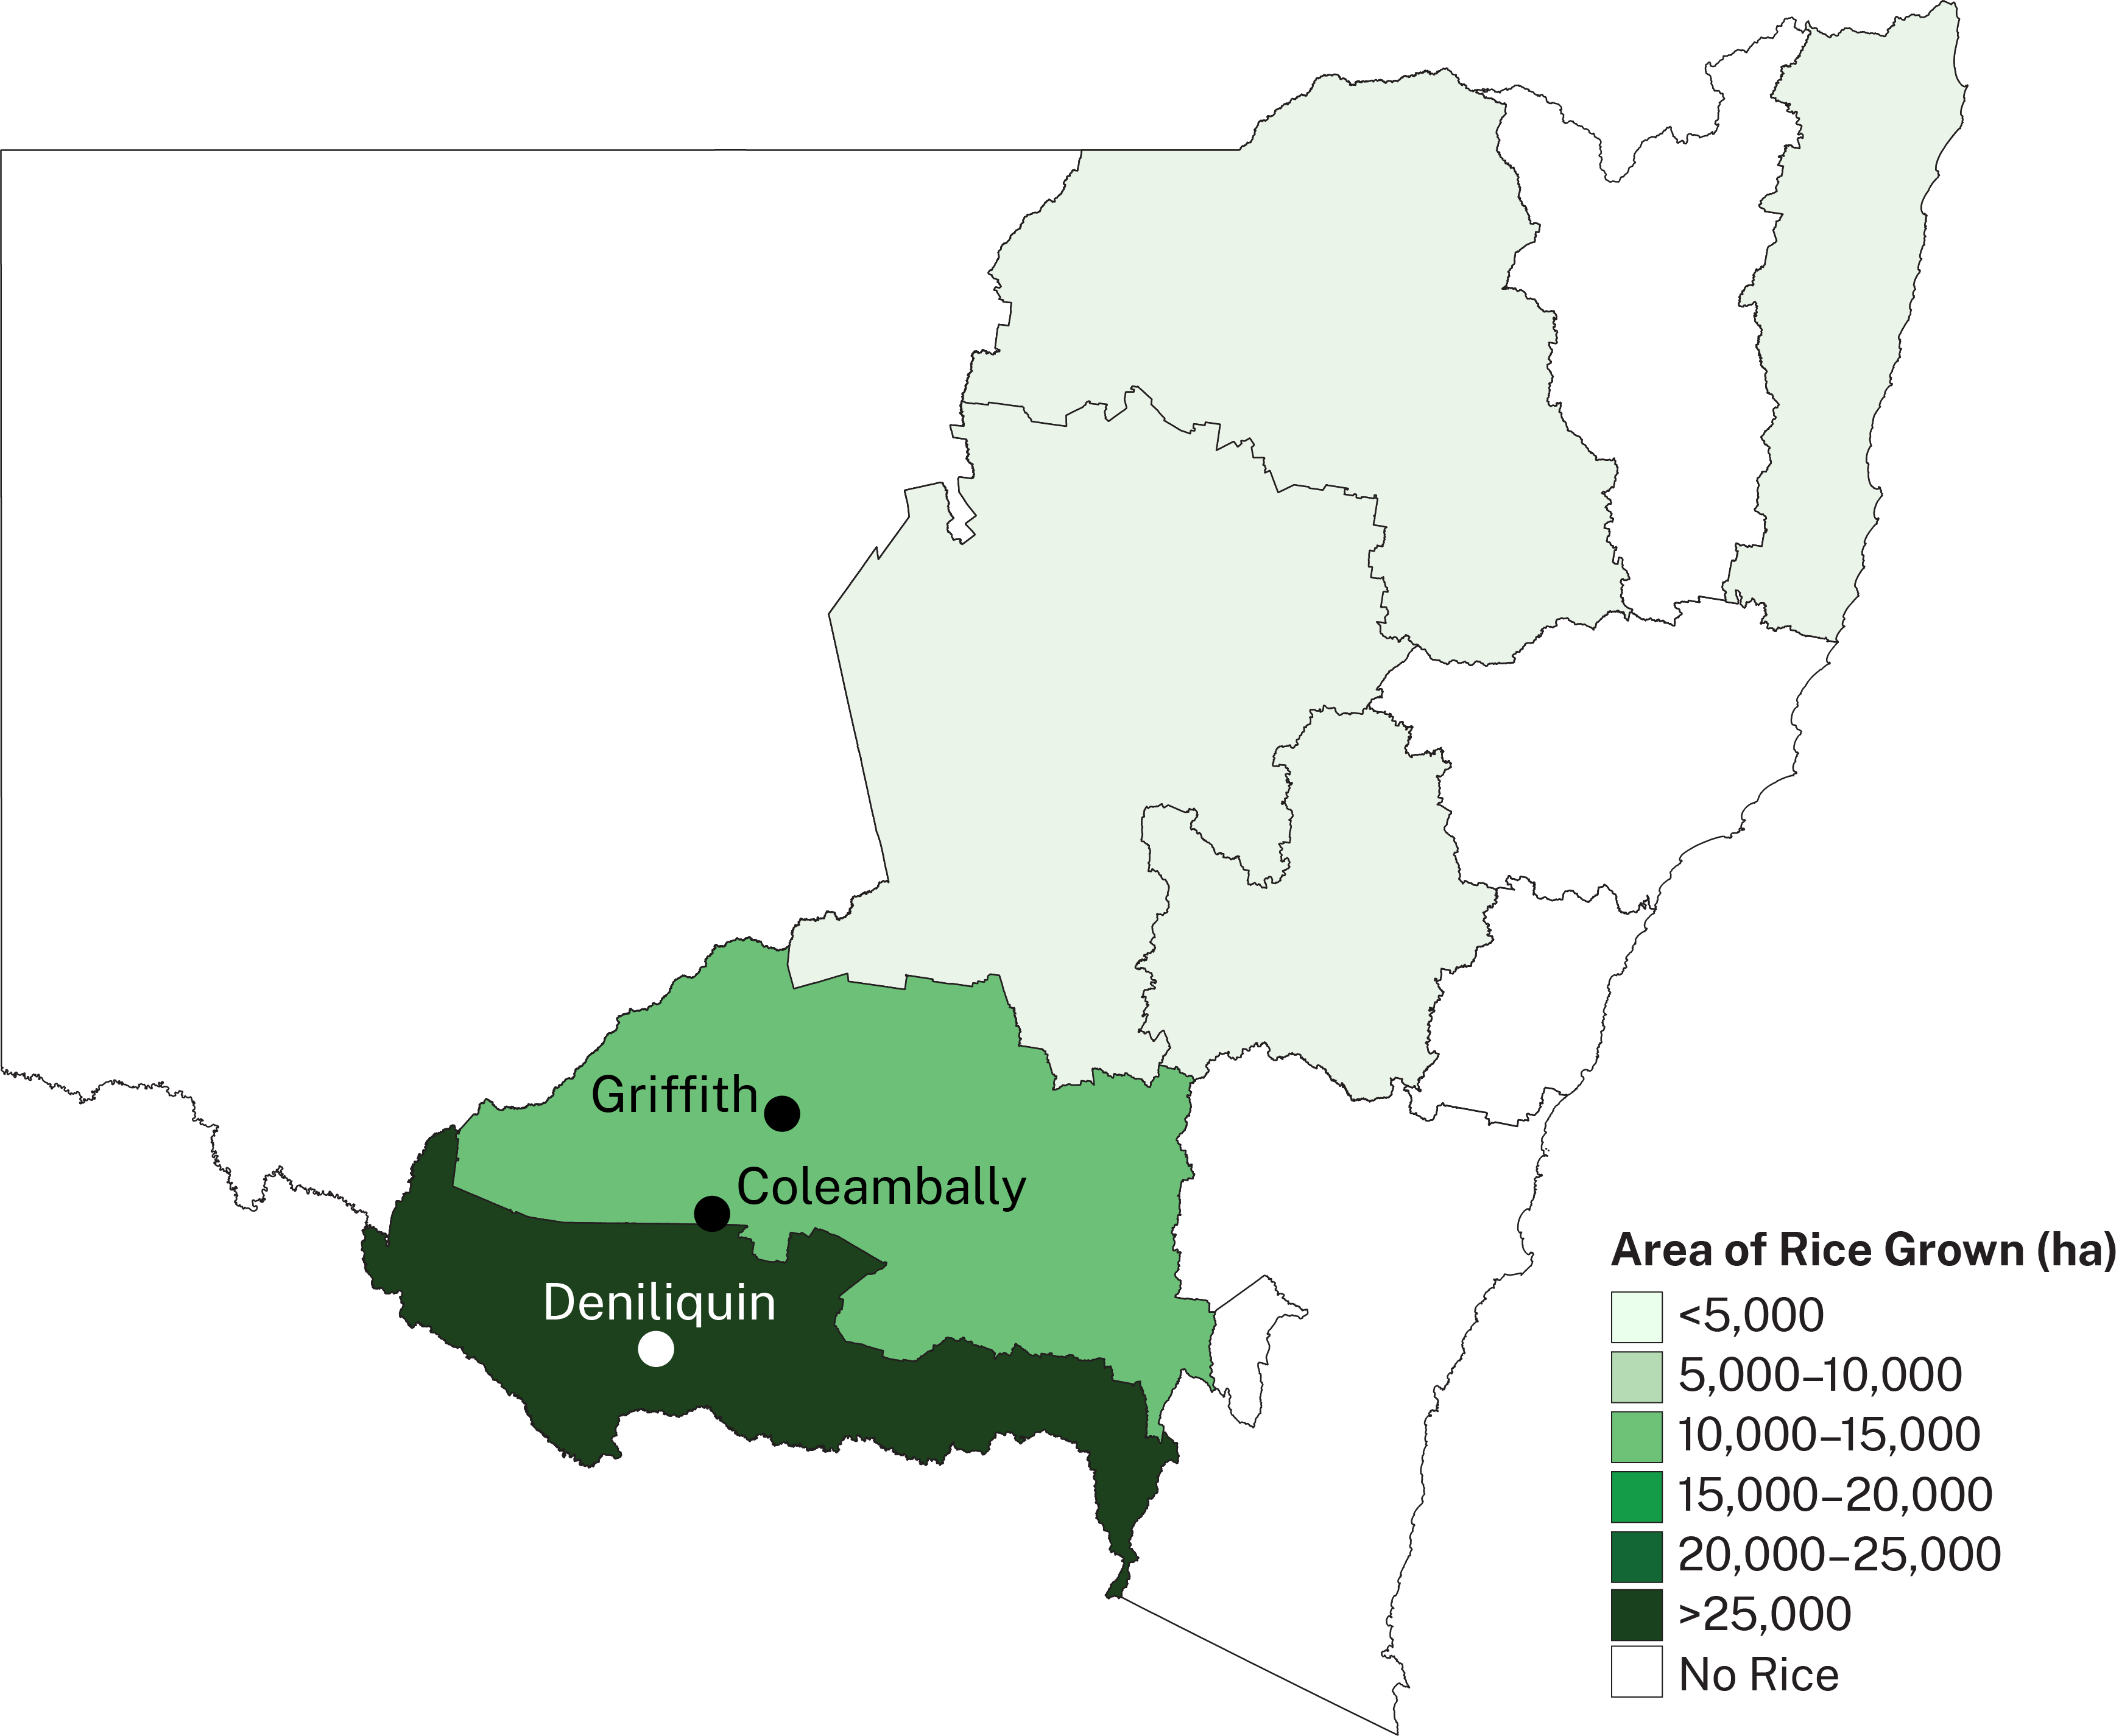 Rice growing in NSW is concentrated in the central south of the state.